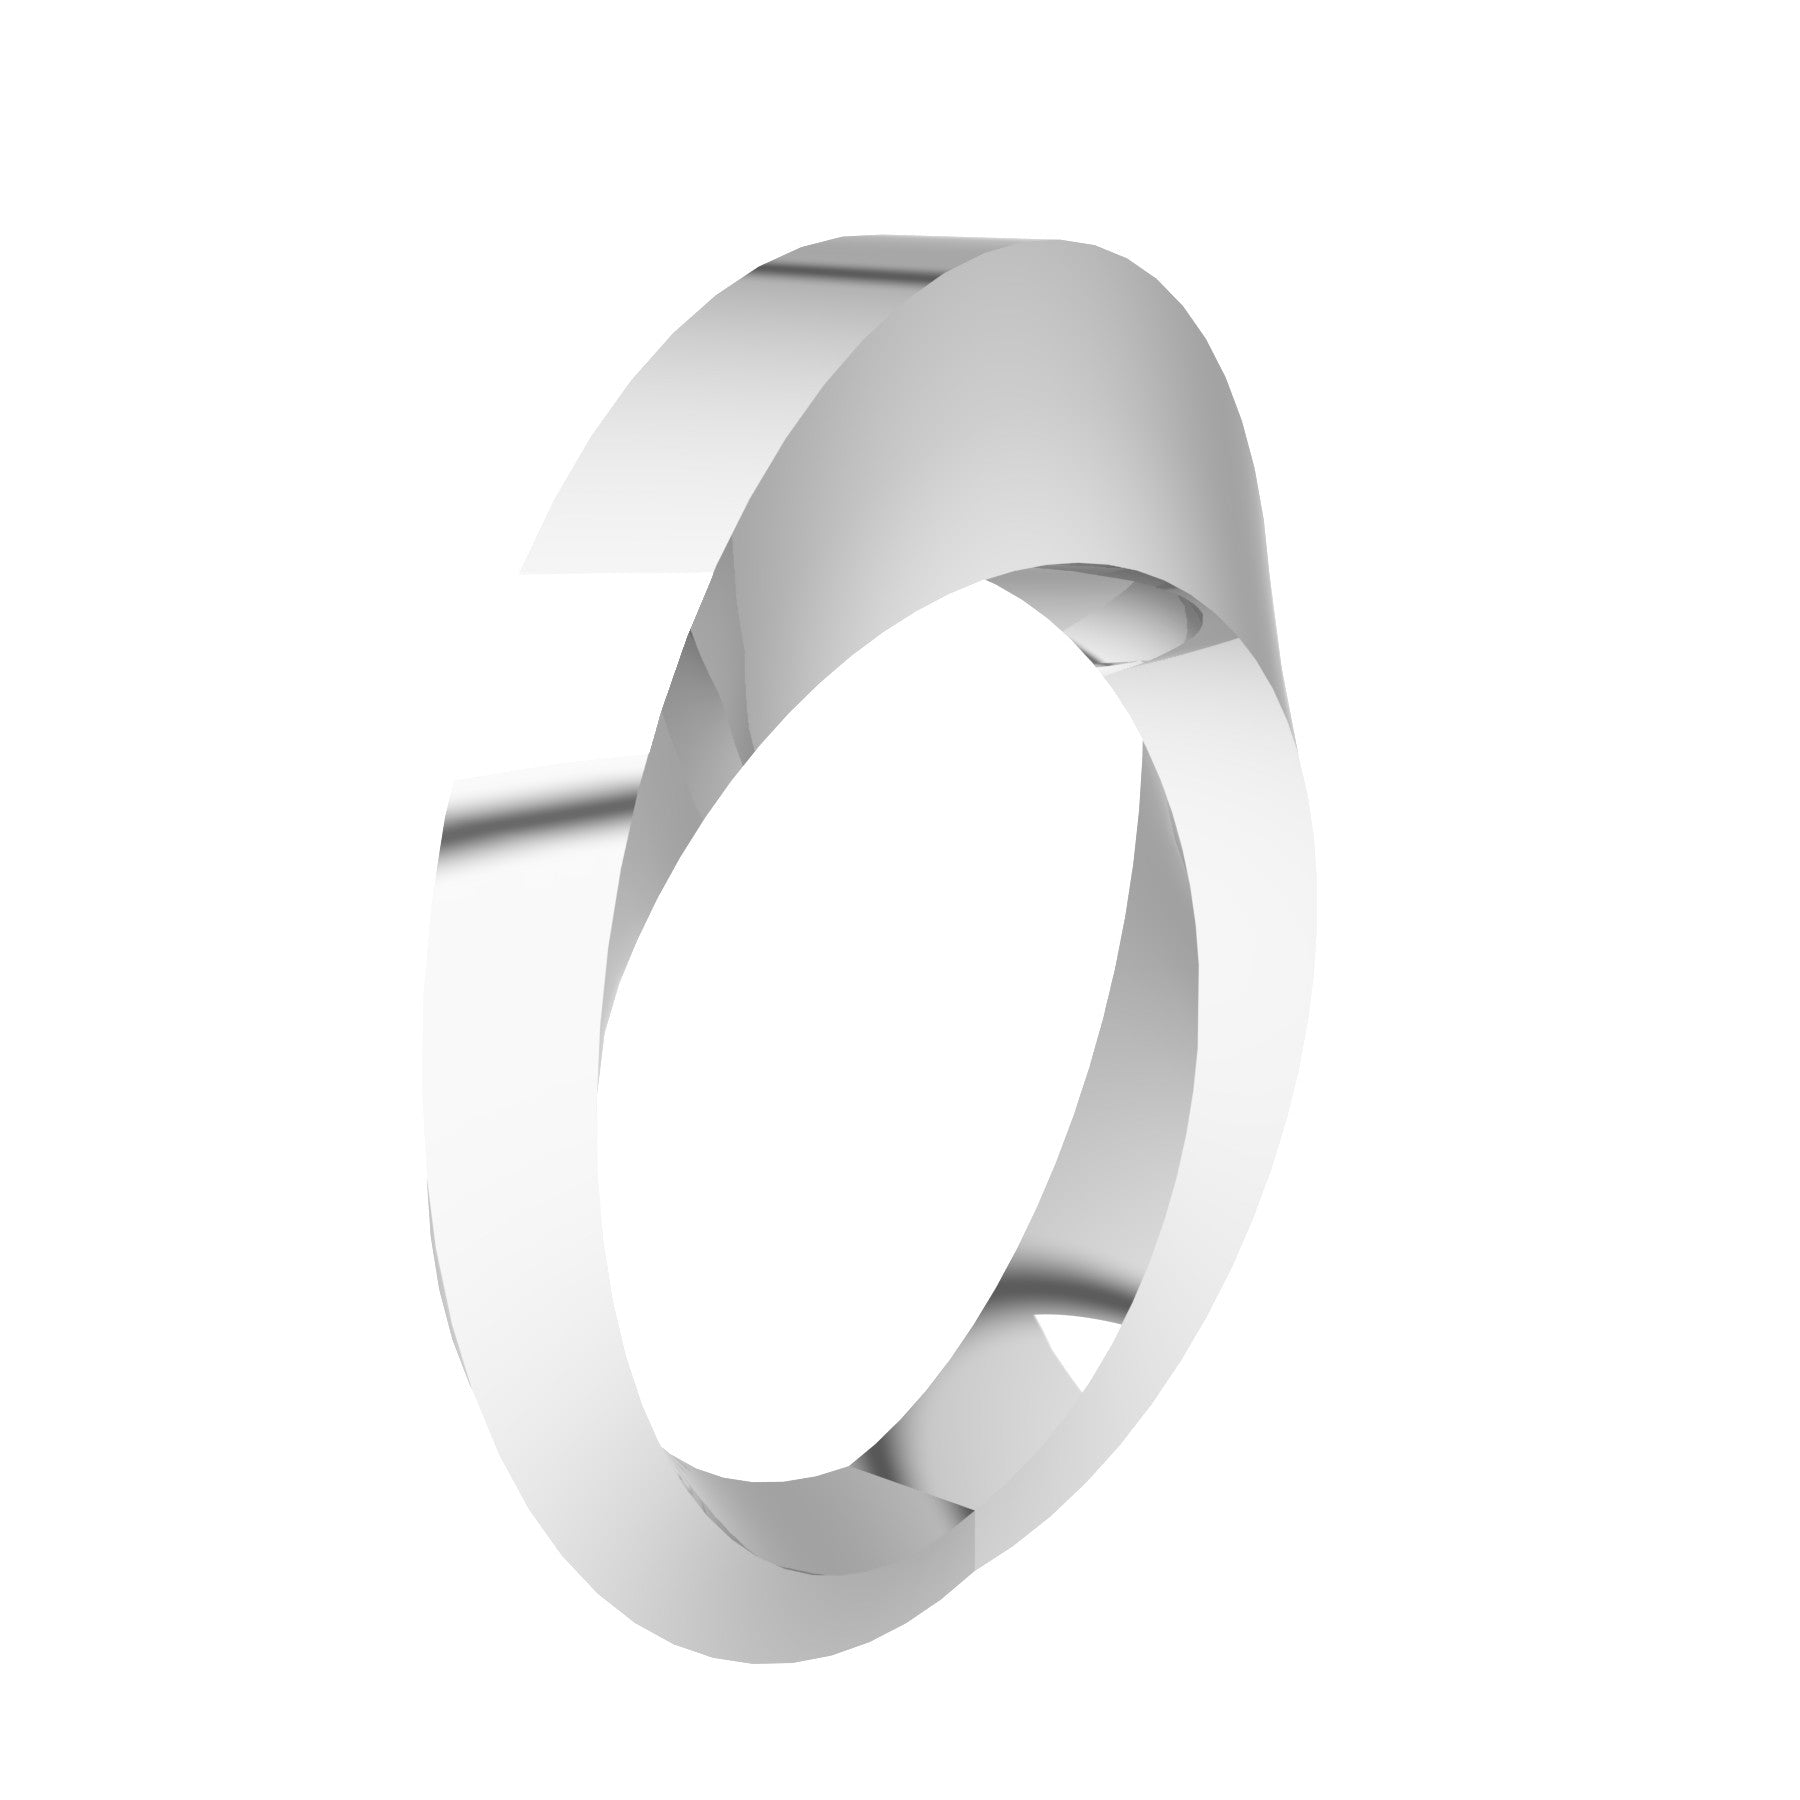 crazy ribbon ring, 18 K white gold, weight about 11,7 g (0.41 oz) width 3 mm